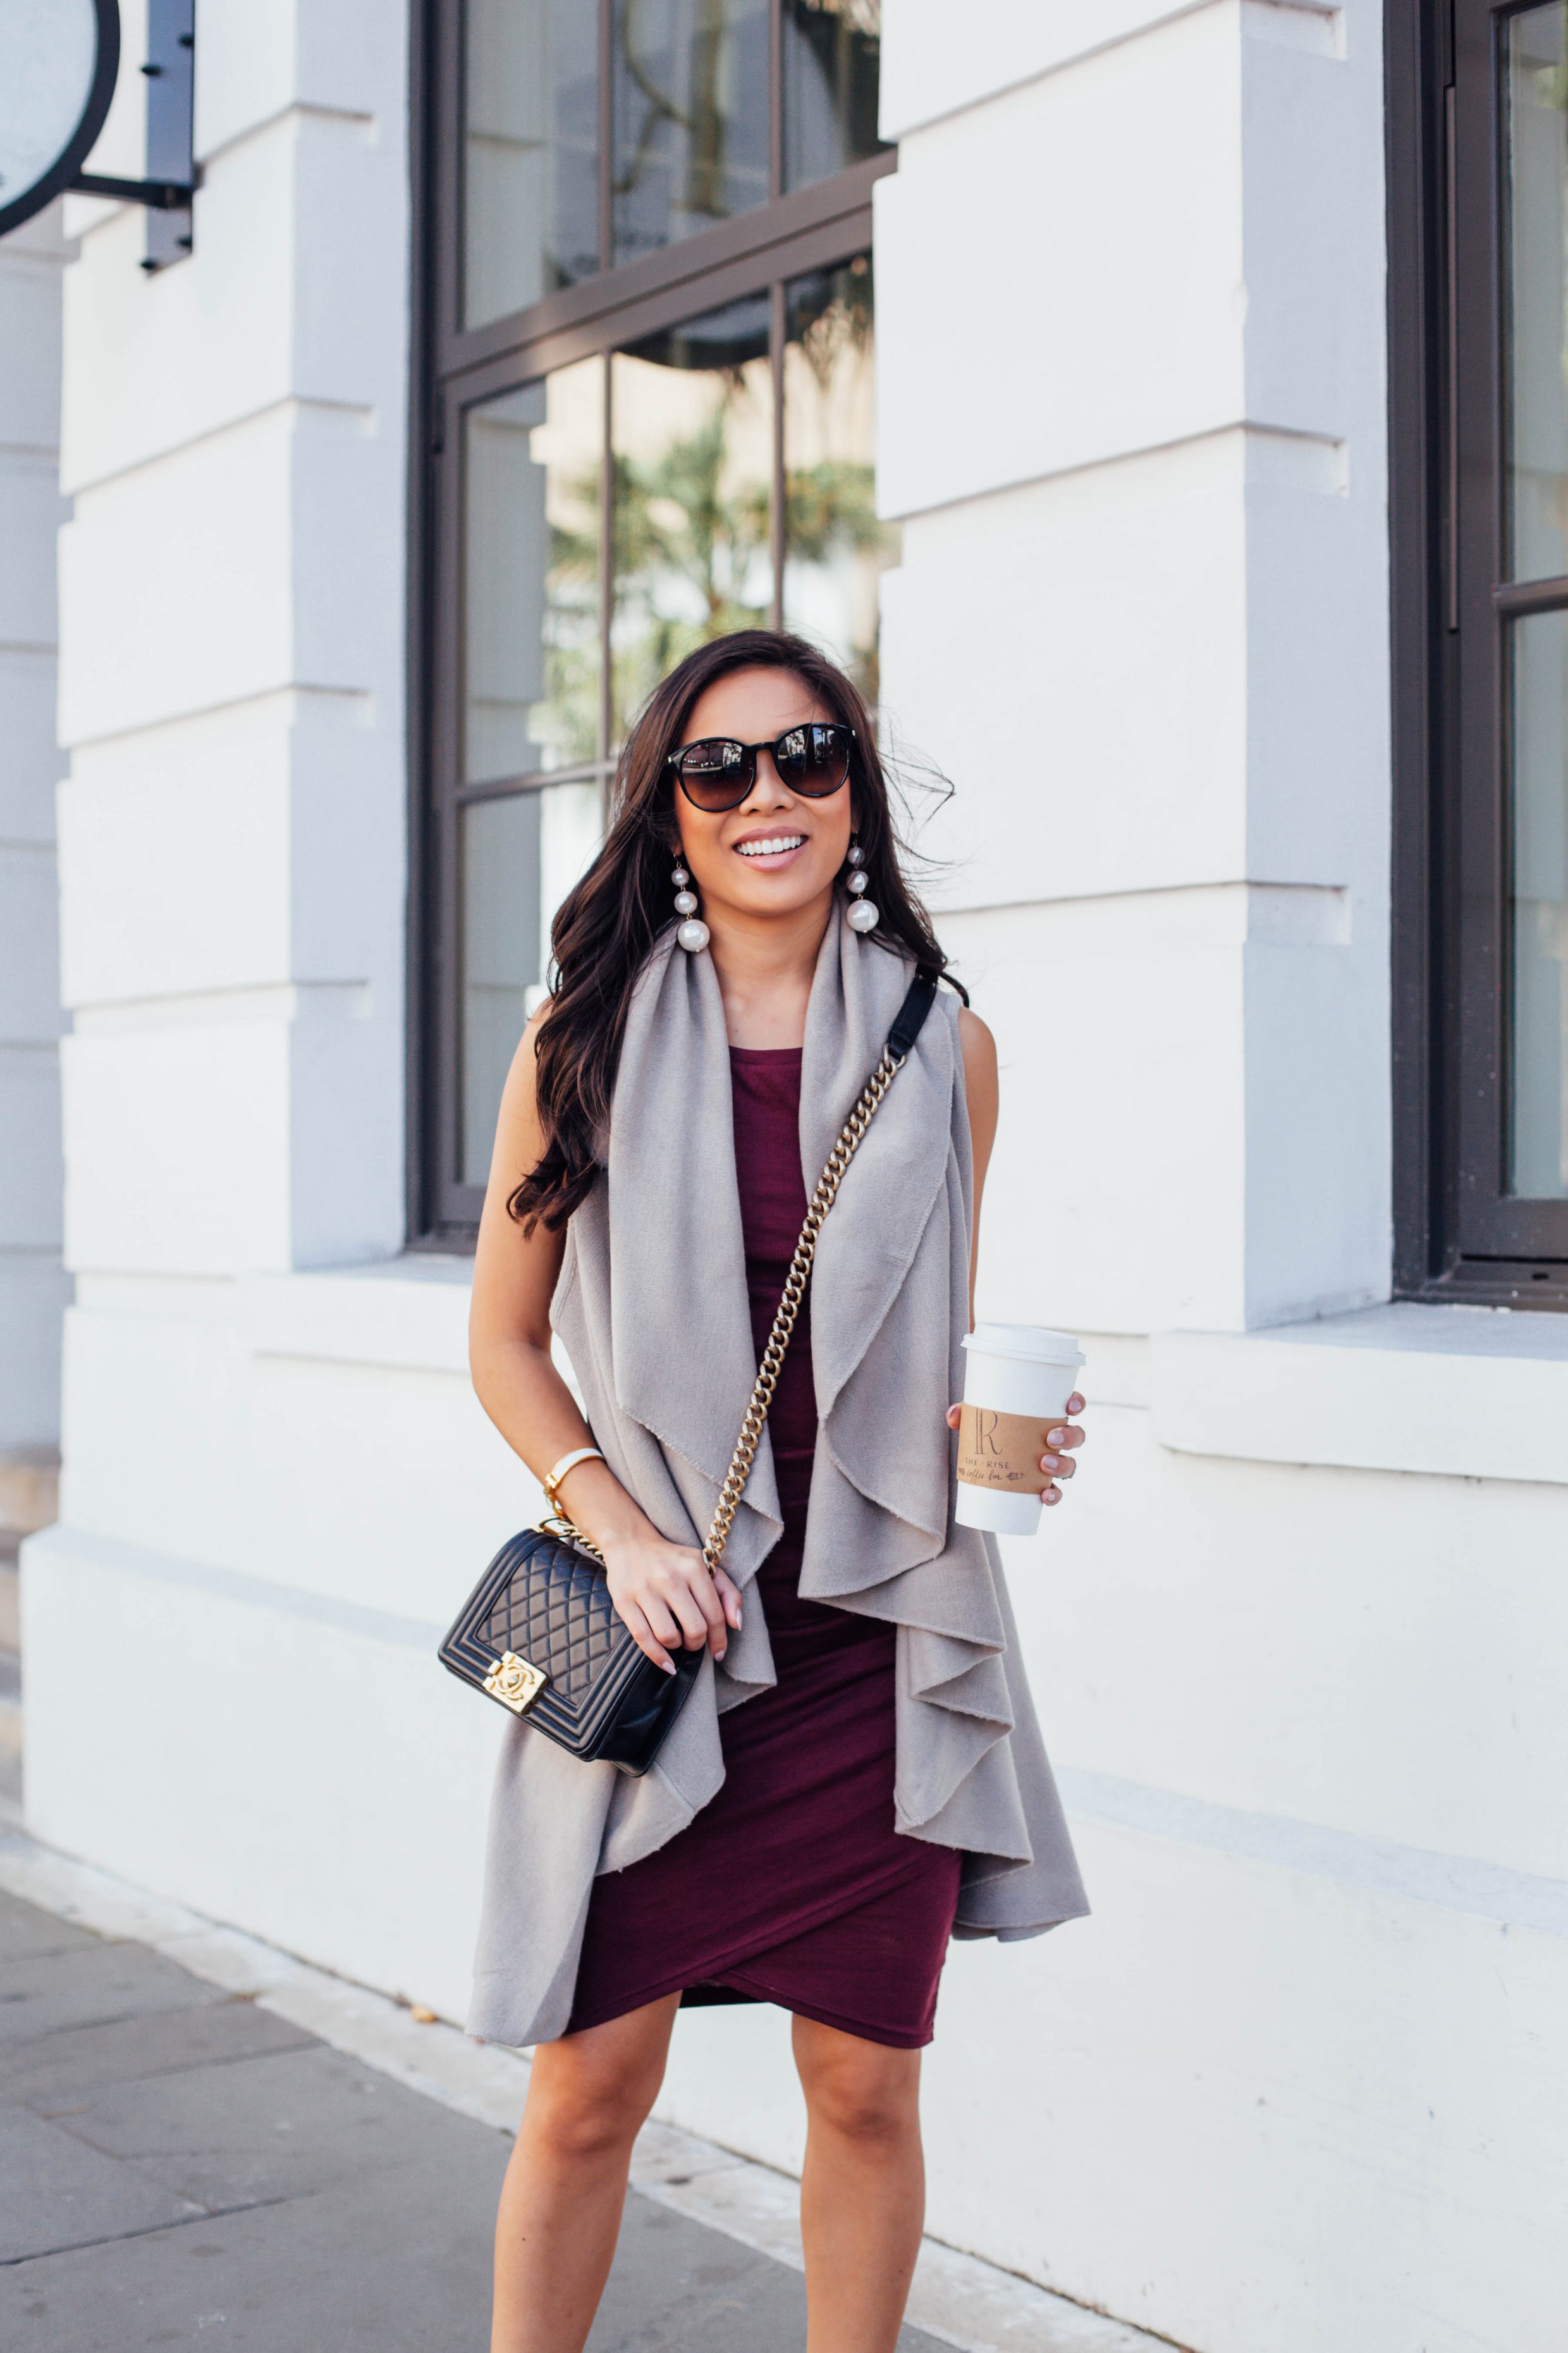 Sleeveless Shawl & Bodycon Dress for a morning in Charleston | Color & Chic